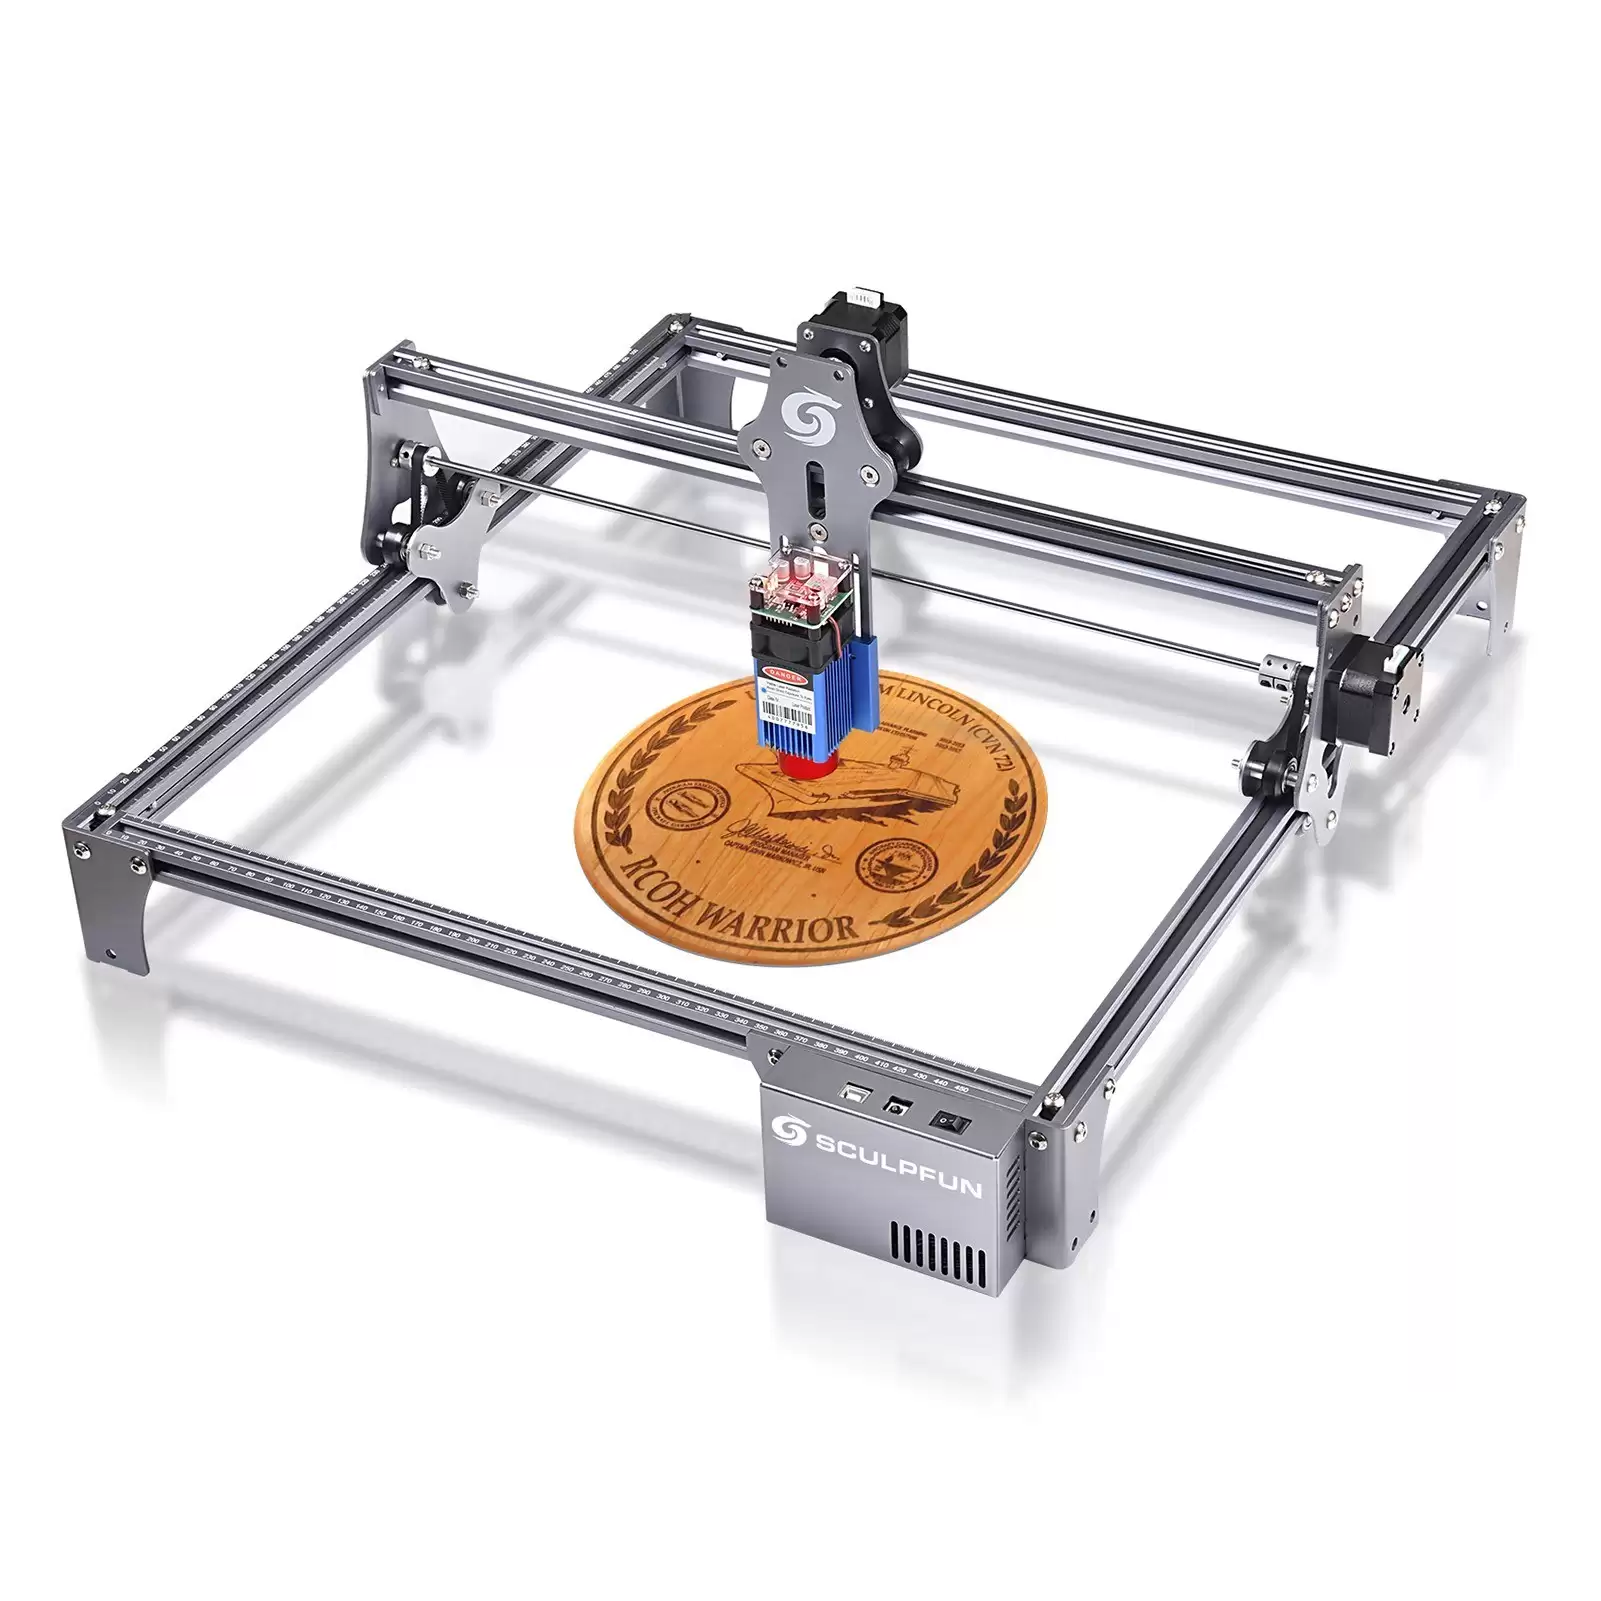 Order In Just $268.15 [eu Warehouse] $99 Off Sculpfun S6 30w Laser Engraver, Free Shipping At Tomtop